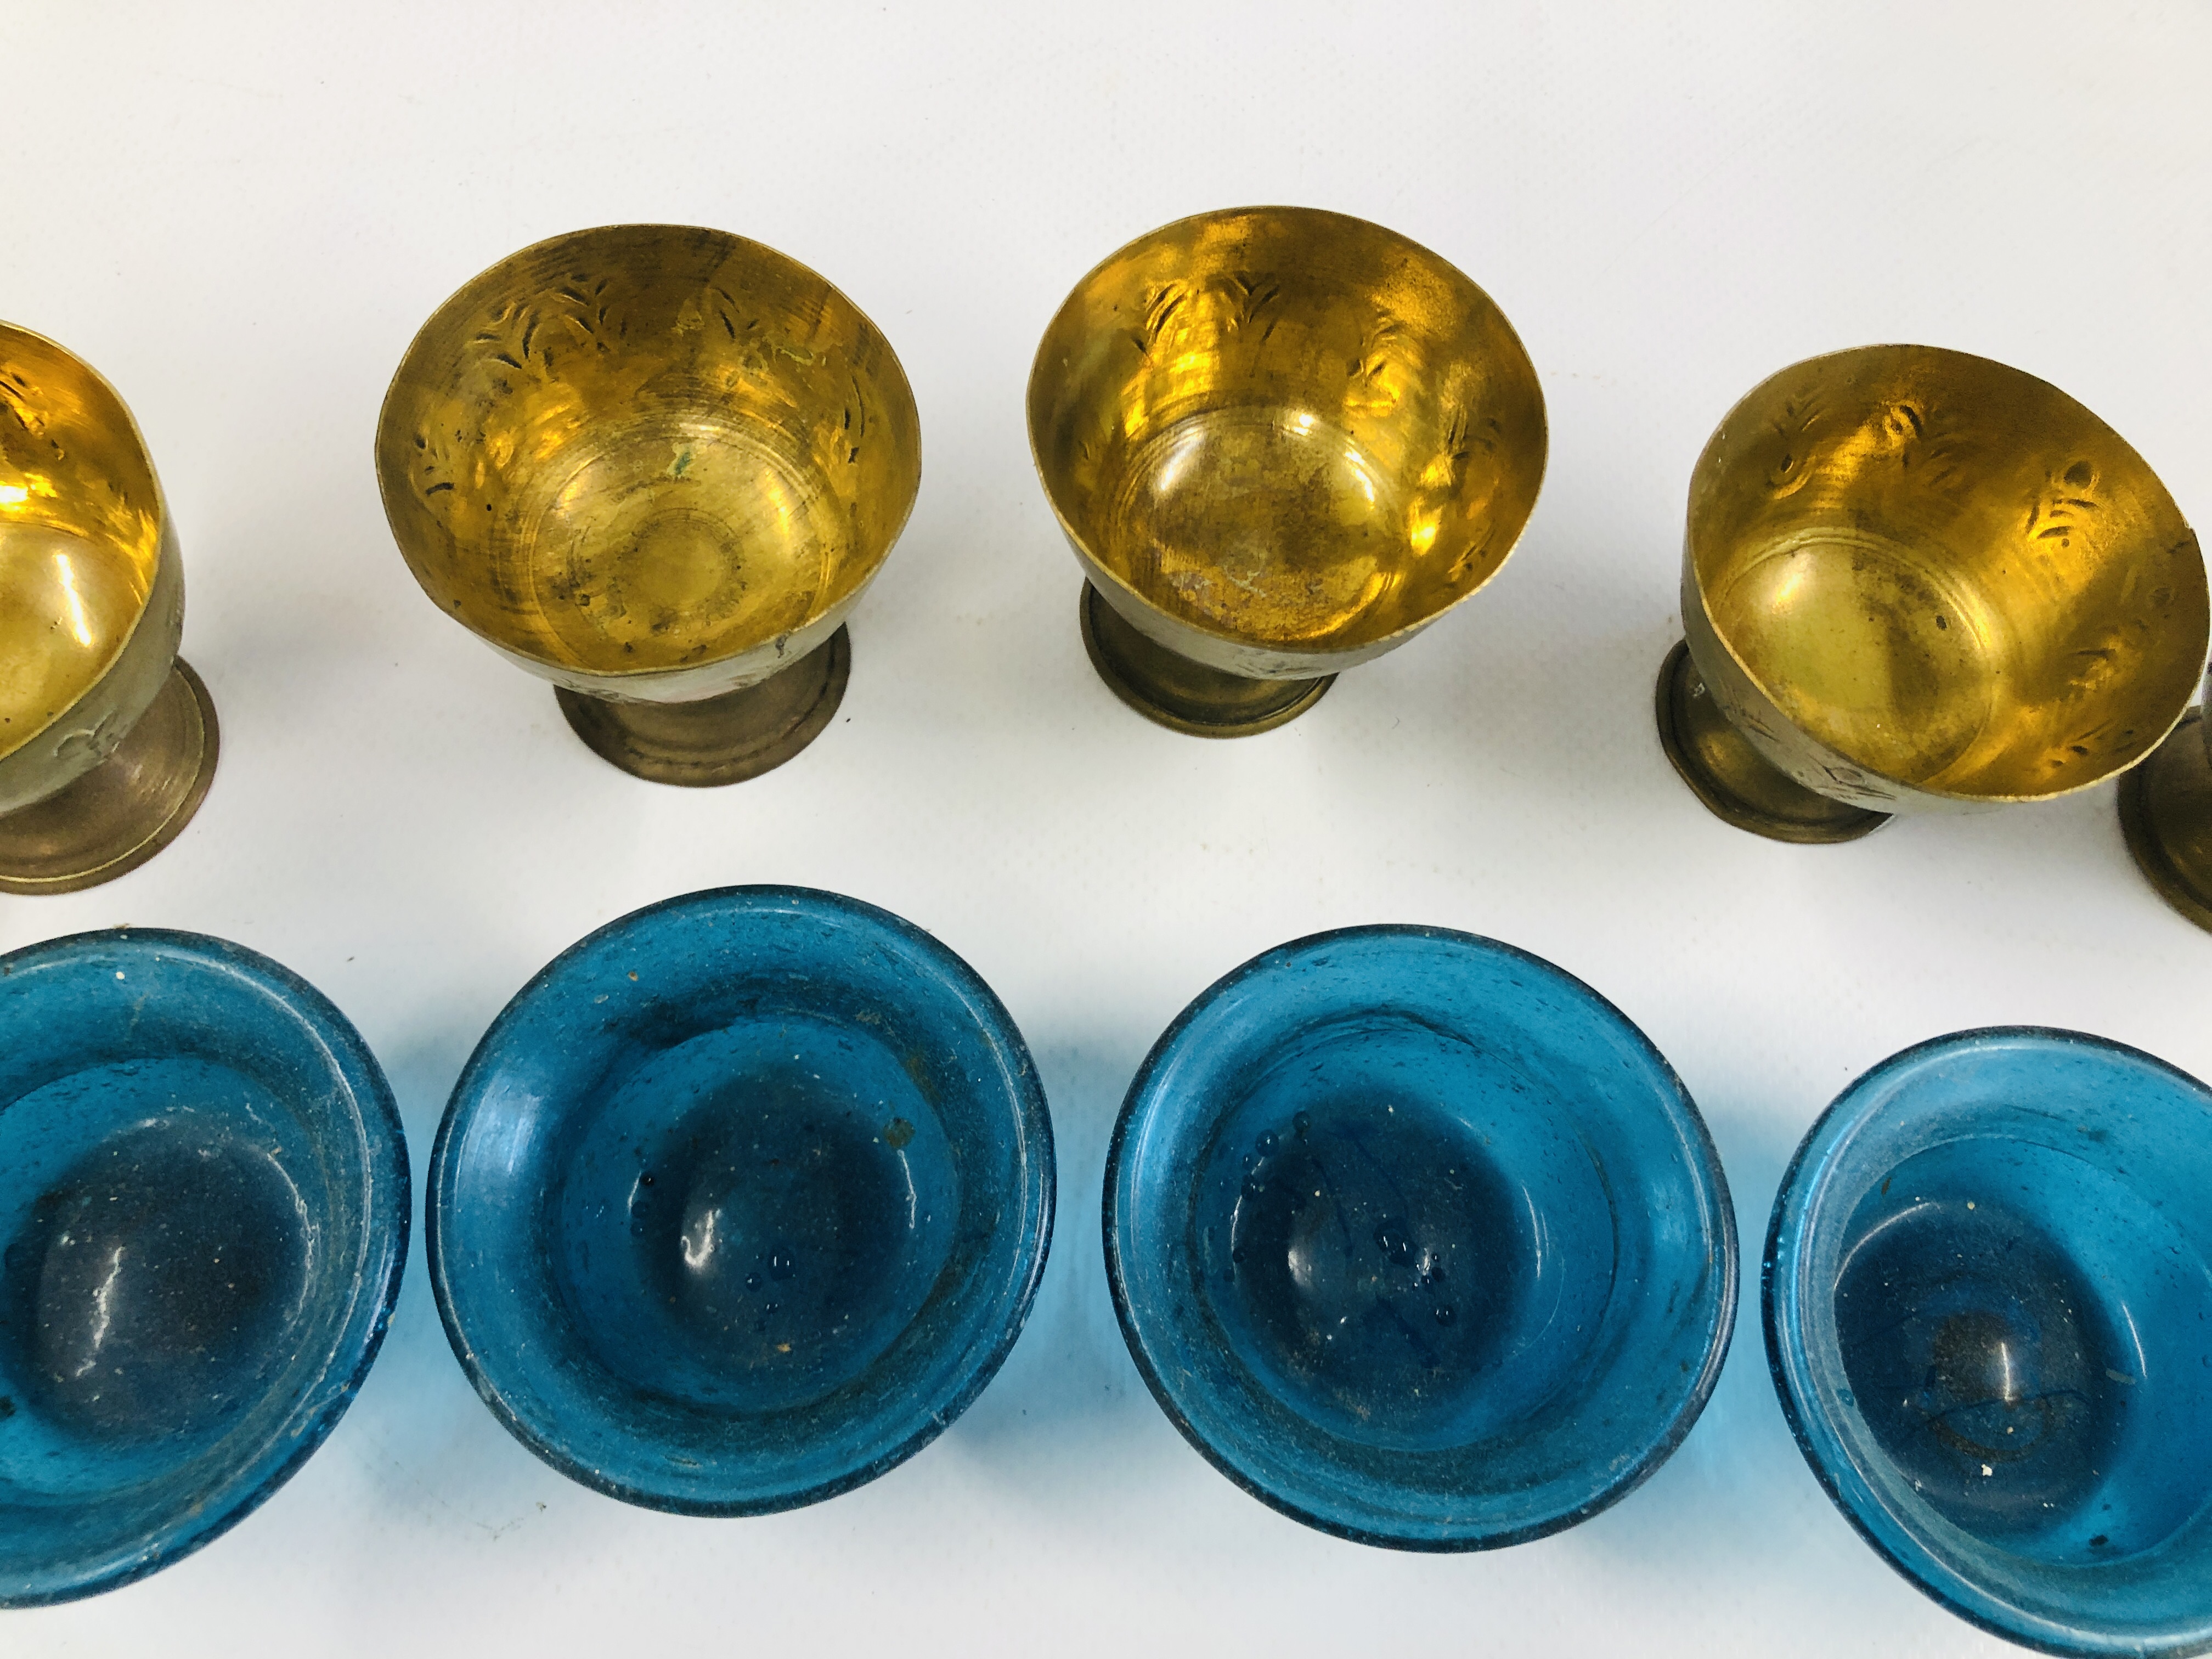 A SET OF SIX MIDDLE EASTERN BRASS GOBLET VESSELS WITH BLUE GLASS LINERS. - Image 9 of 11